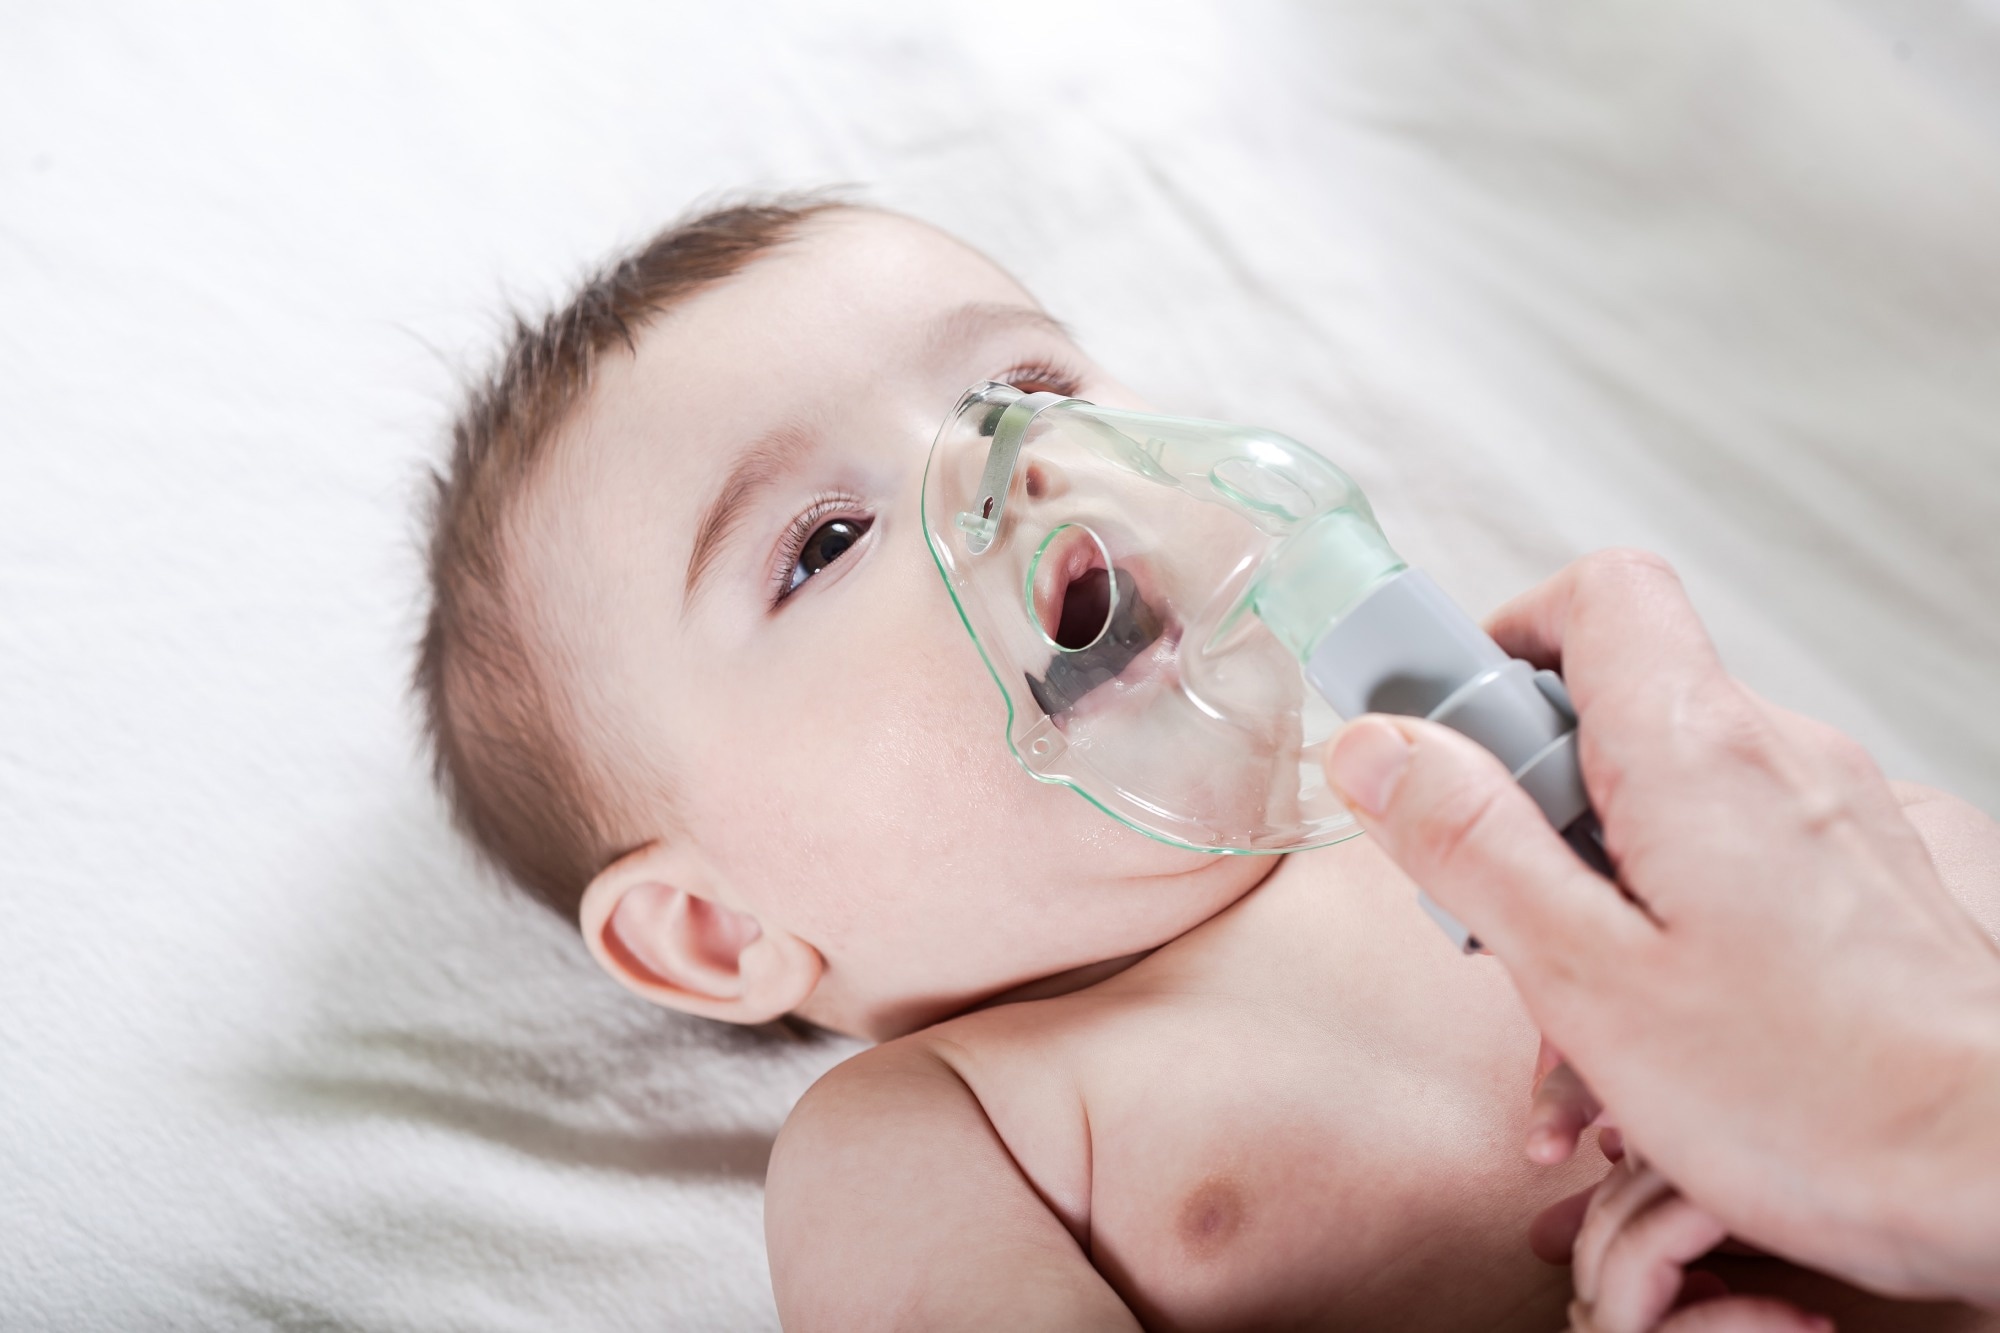 Study: Respiratory syncytial virus infection during infancy and asthma during childhood in the USA (INSPIRE): A population-based, prospective birth cohort study. Image Credit: Alexander Ishchenko / Shutterstock.com